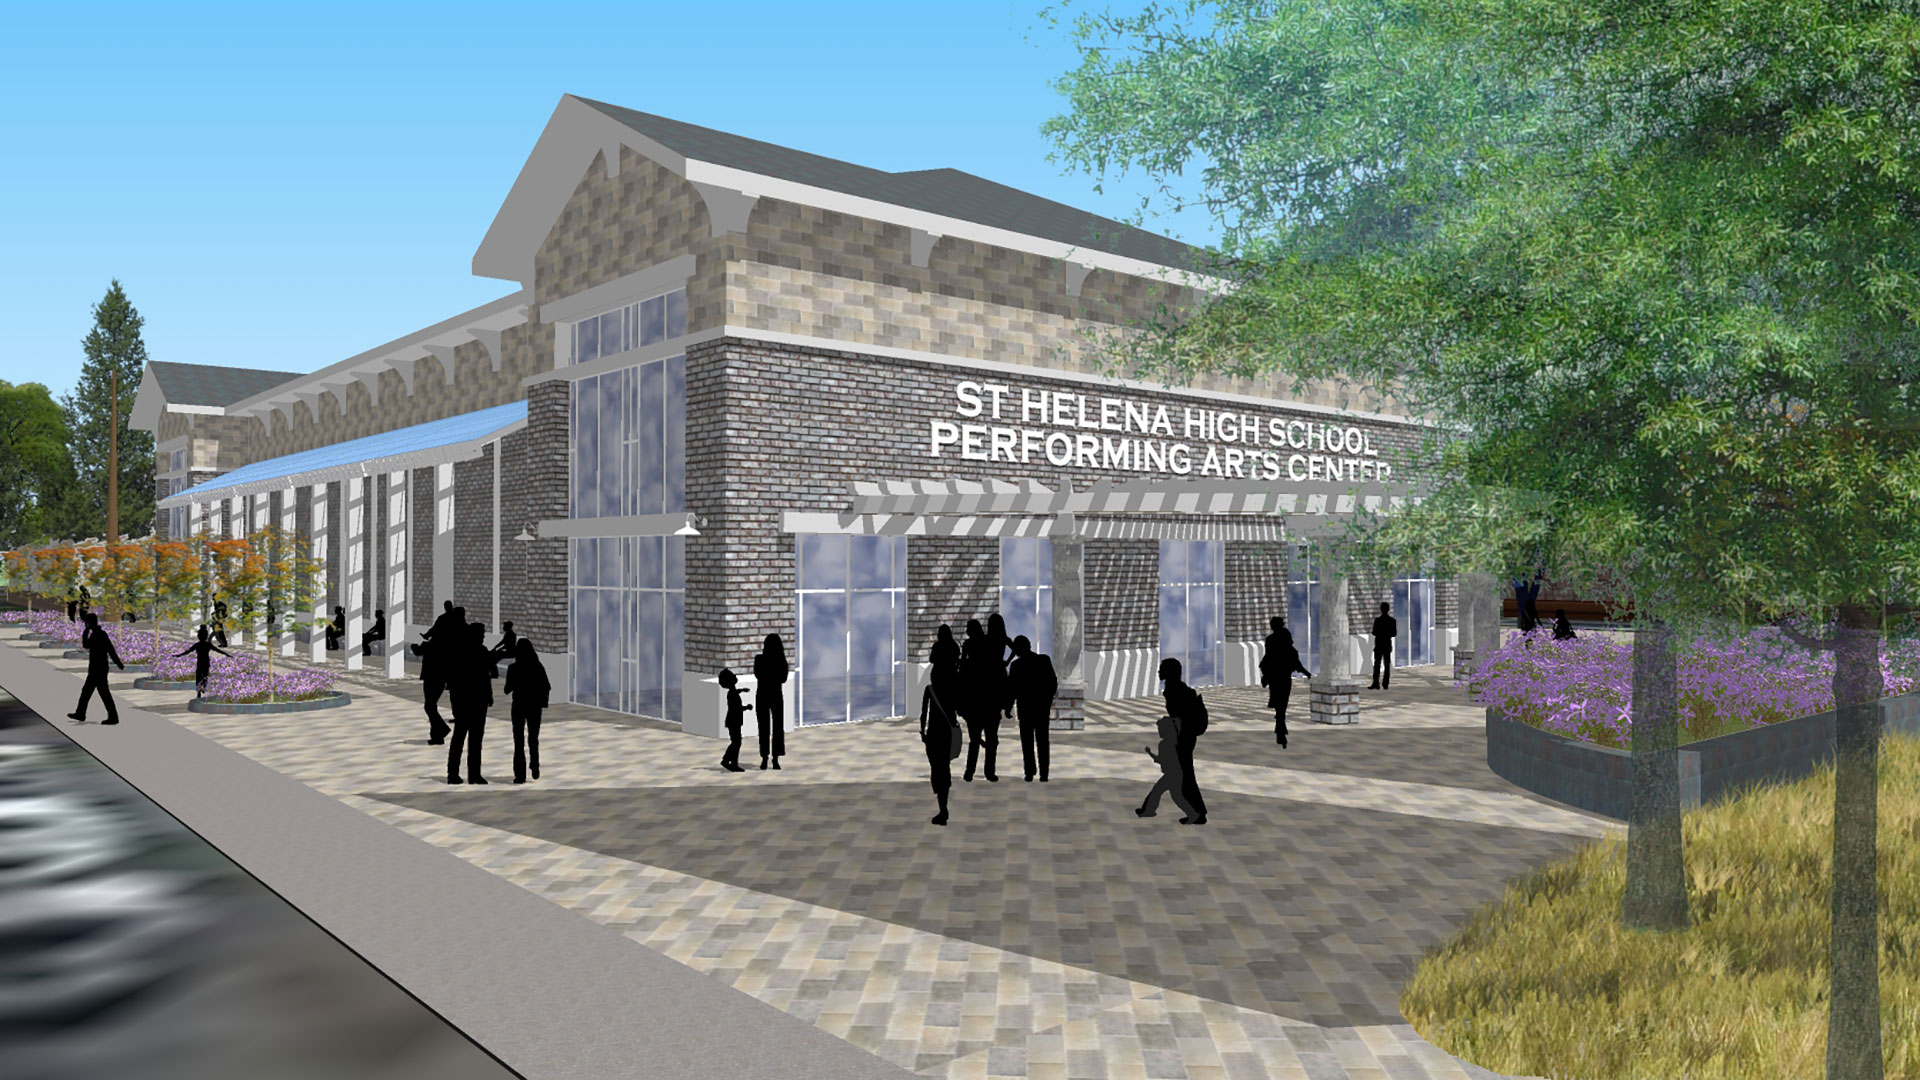 Rendering of theater exterior, vast stone walls with 'St. Helena Performing Arts Center' above in 3D text.